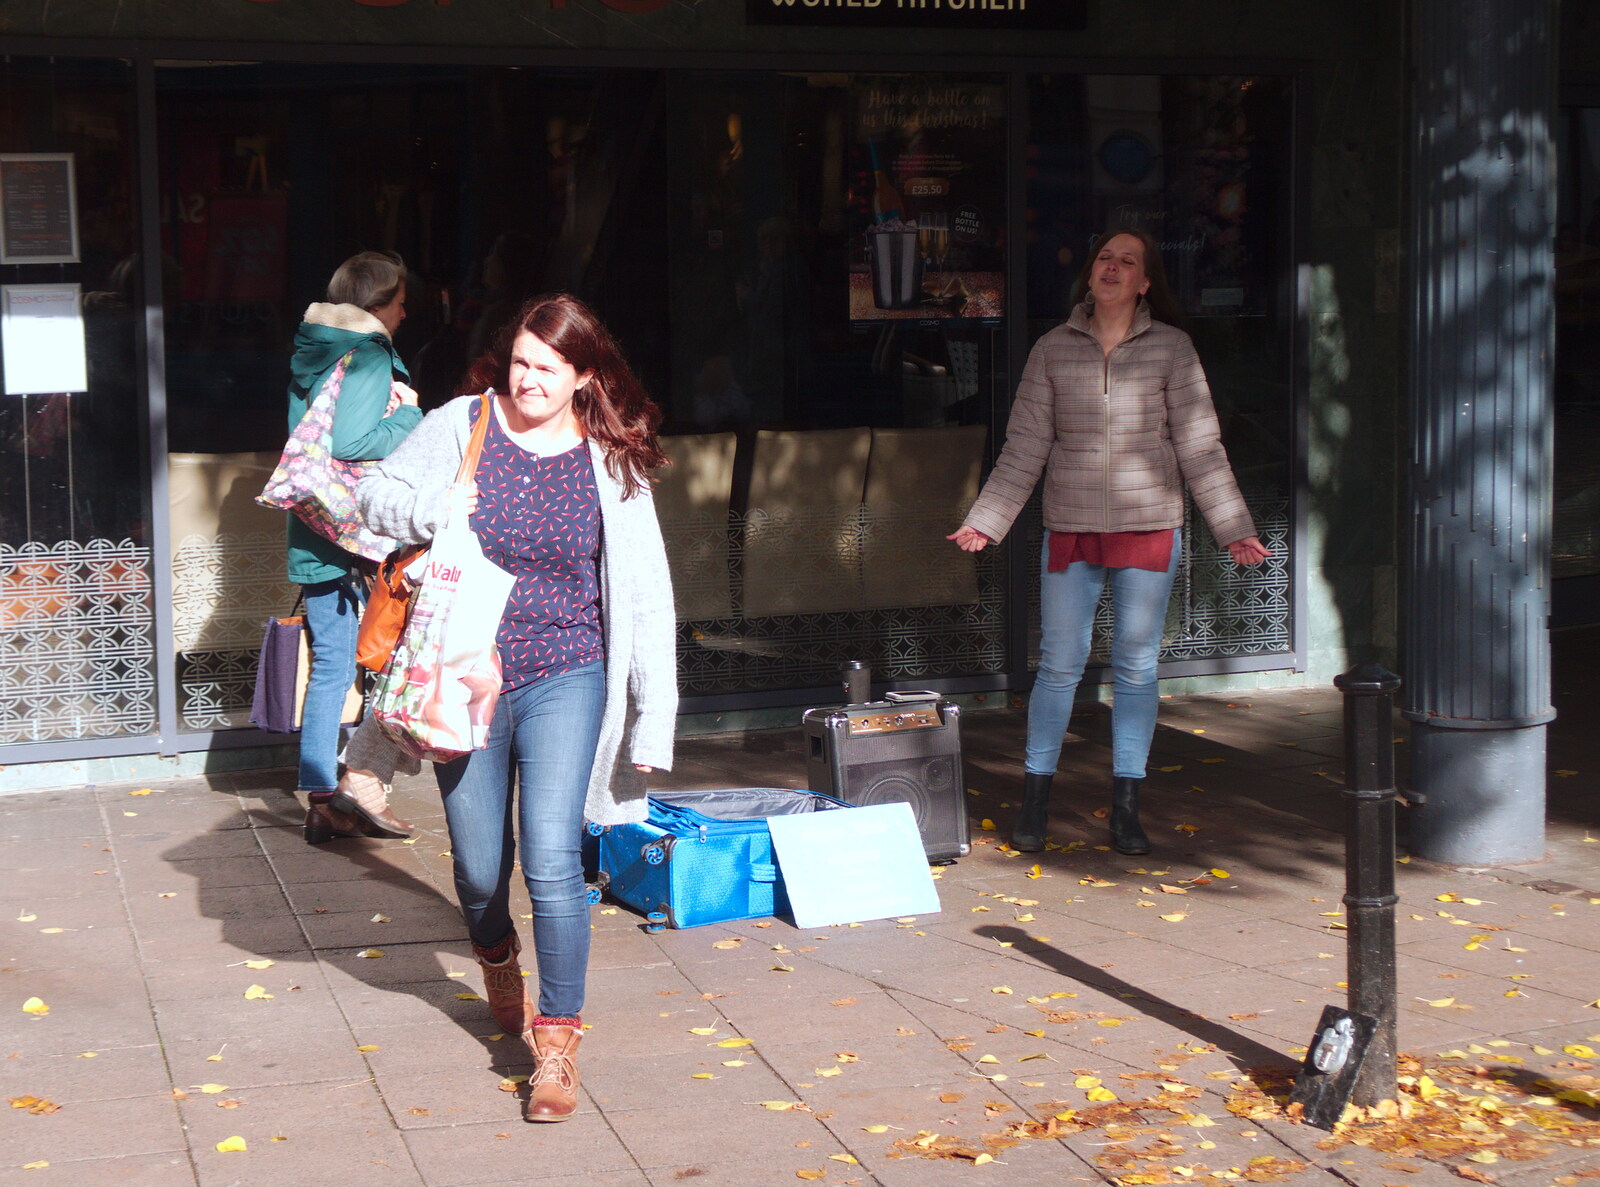 Isobel gives some money to the opera busker from A Trip up the Big City, Norwich, Norfolk - 18th October 2019